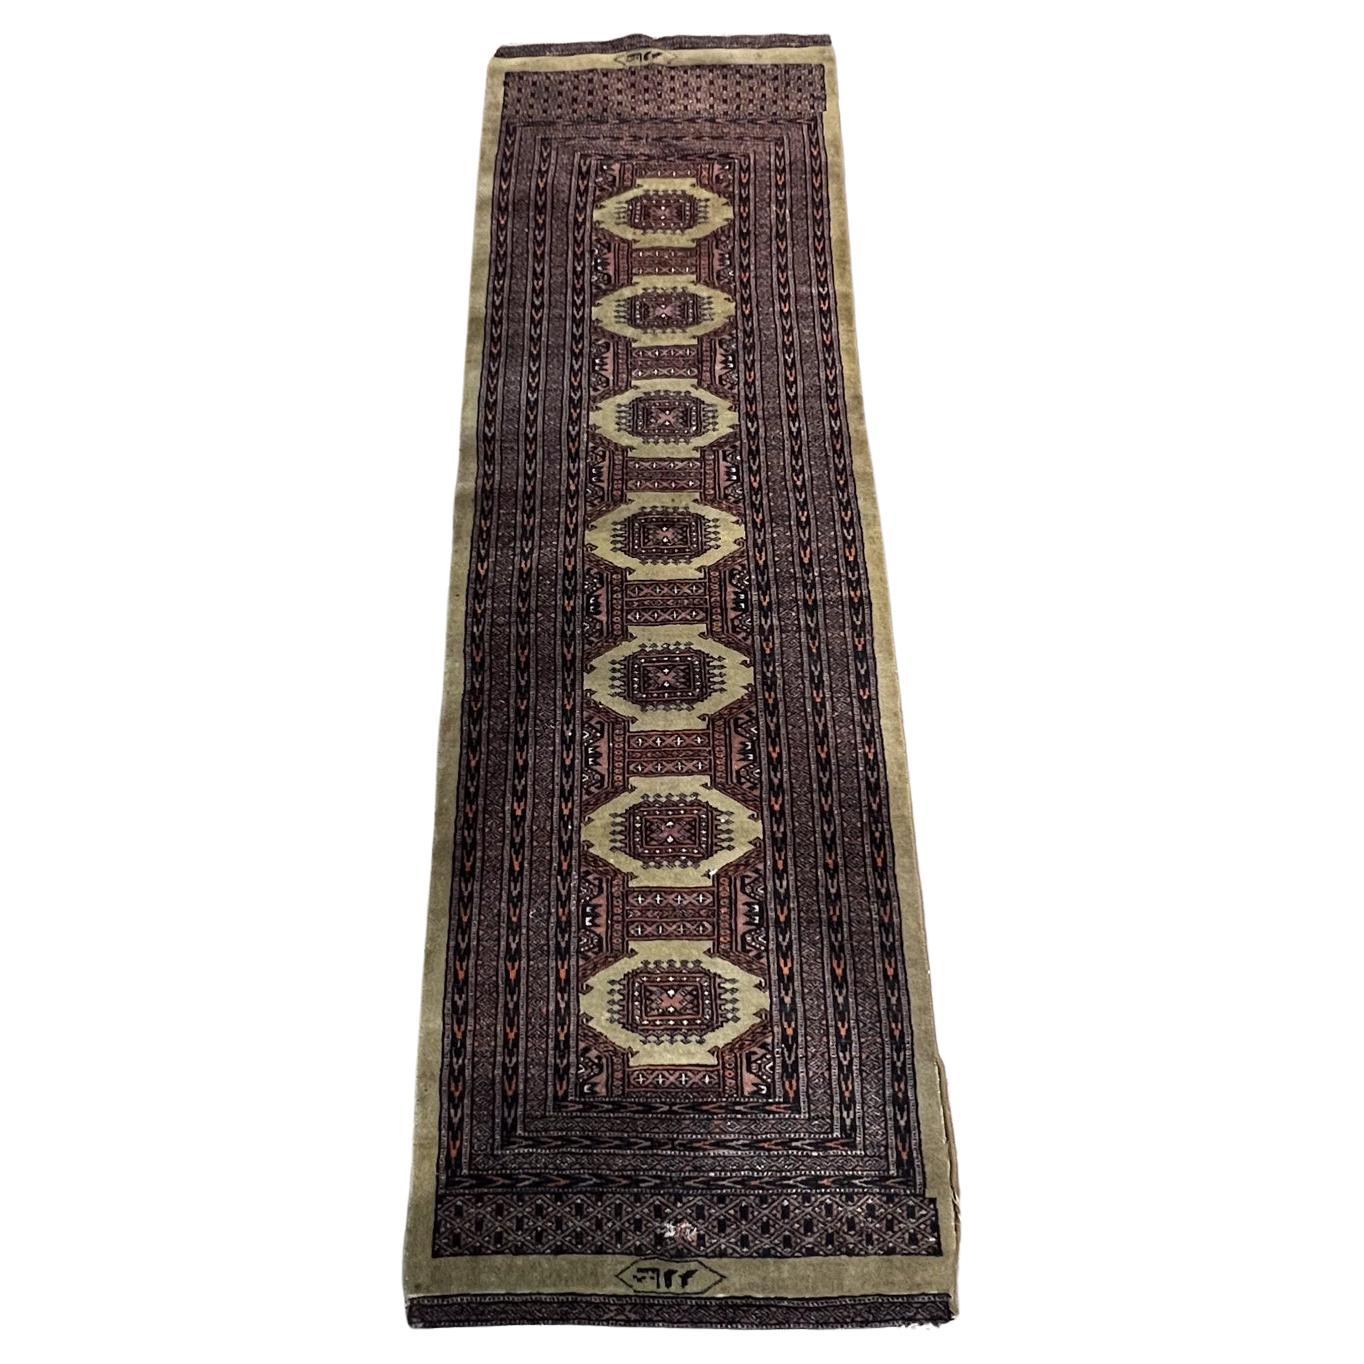 Middle eastern Wall Art Wool Tapestry Traditional Large Prayer Rug Runner
Signed
Handmade Persian prayer Rug
20W x 80L x 2H
Original Unrestored Vintage Condition. Wear consistent with age and use. Minor fading.
Refer to images.